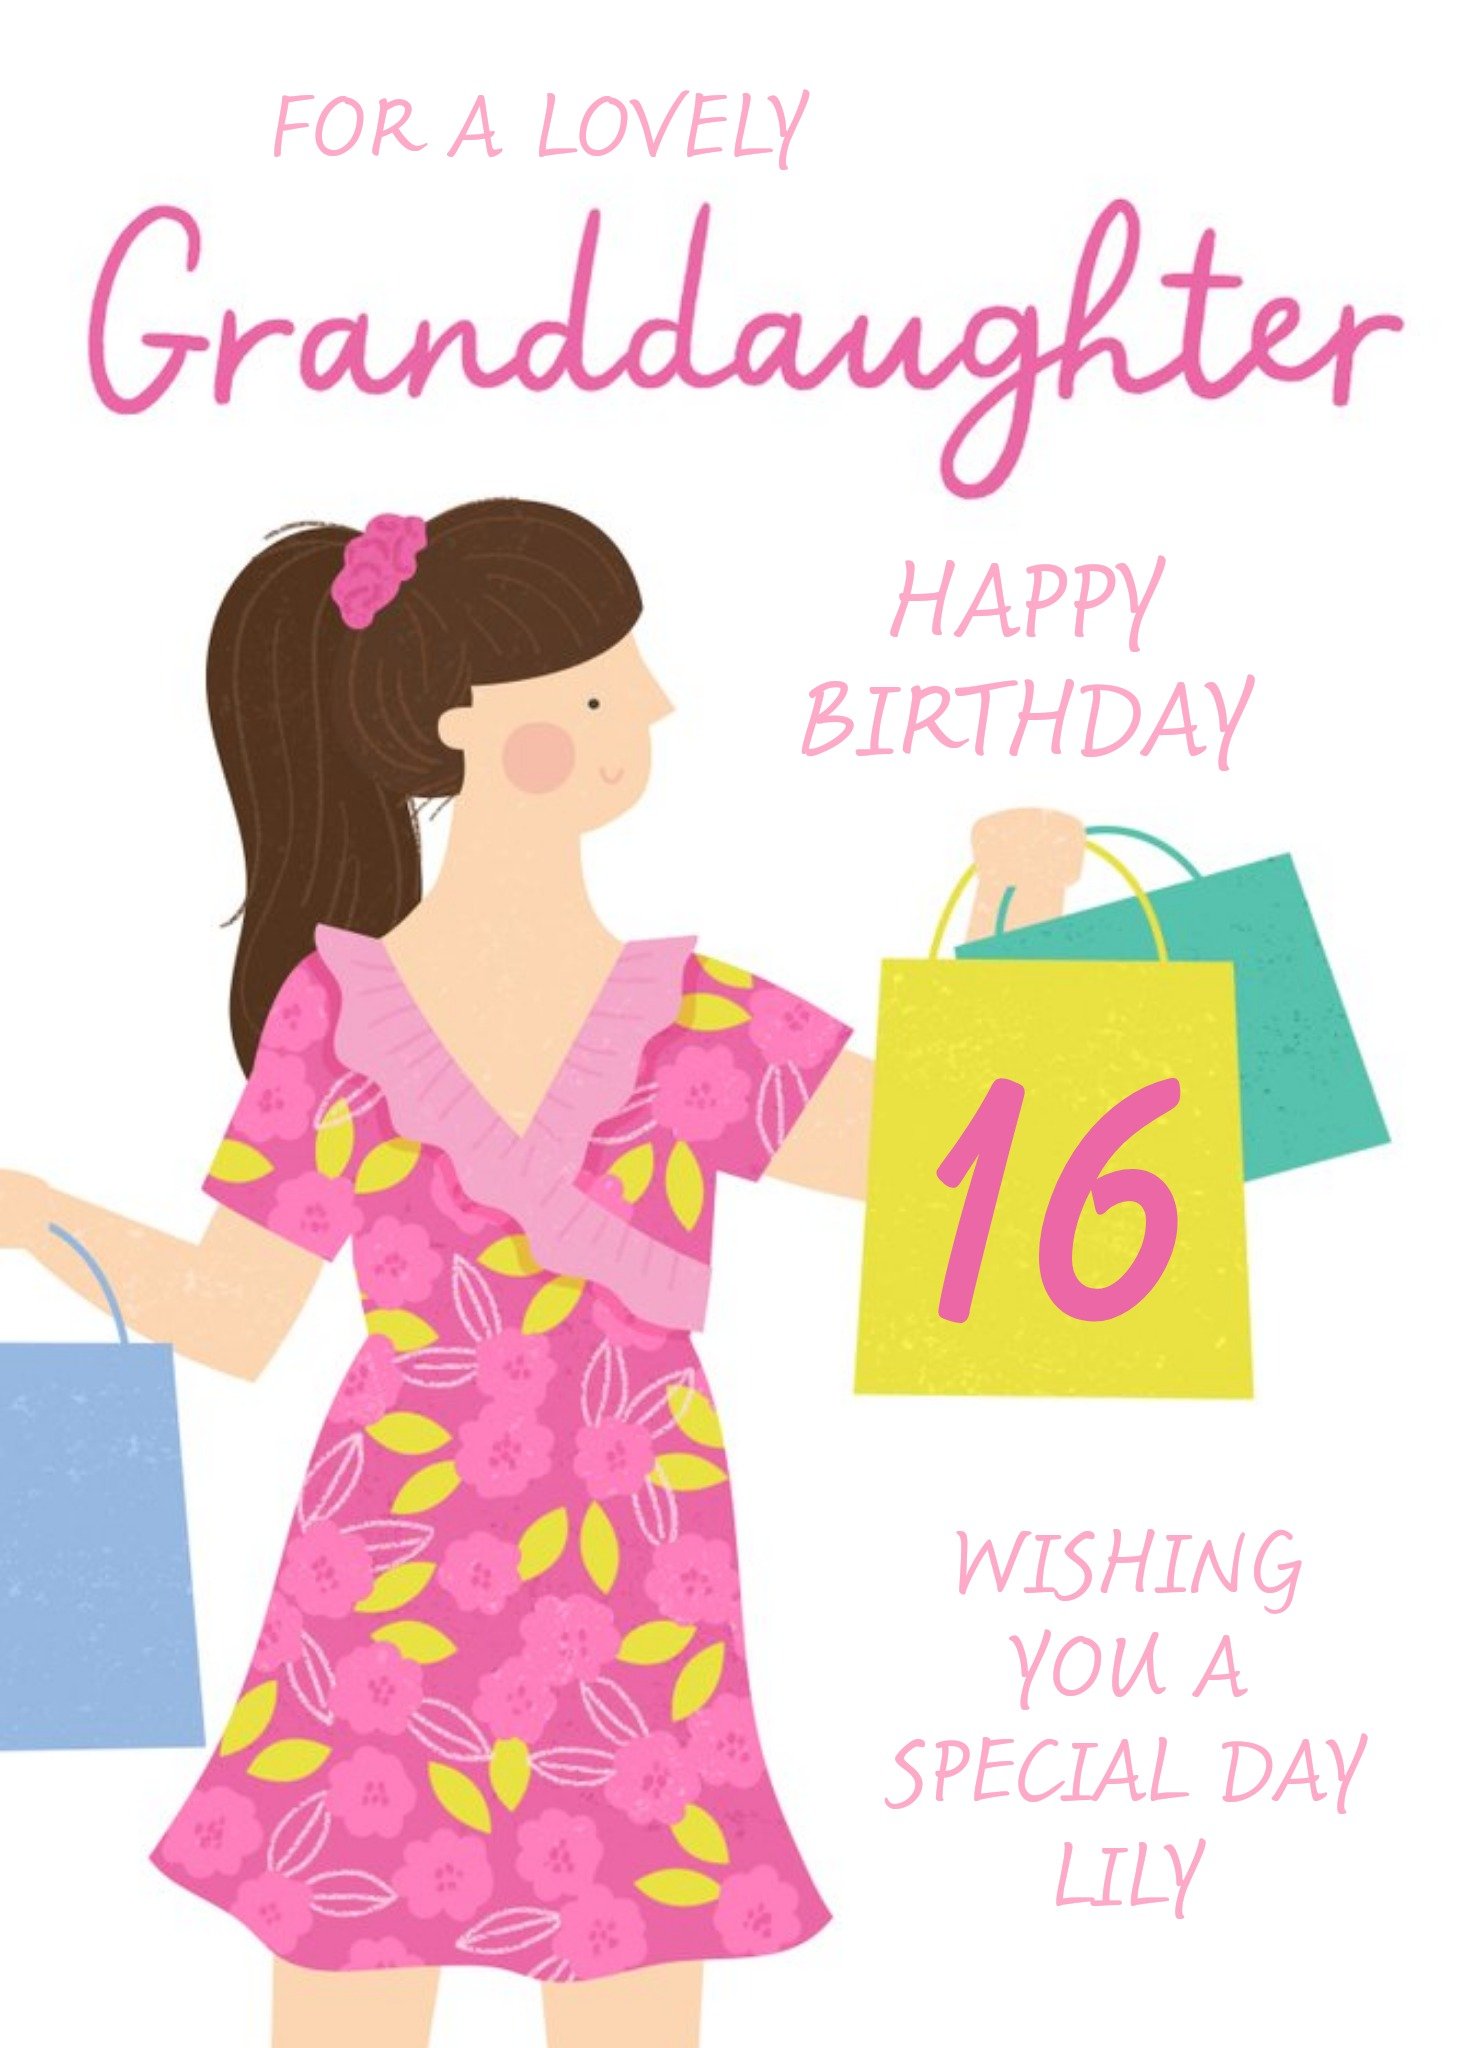 Moonpig Lovely Granddaughter Shopping Bags 16th Birthday Card, Large